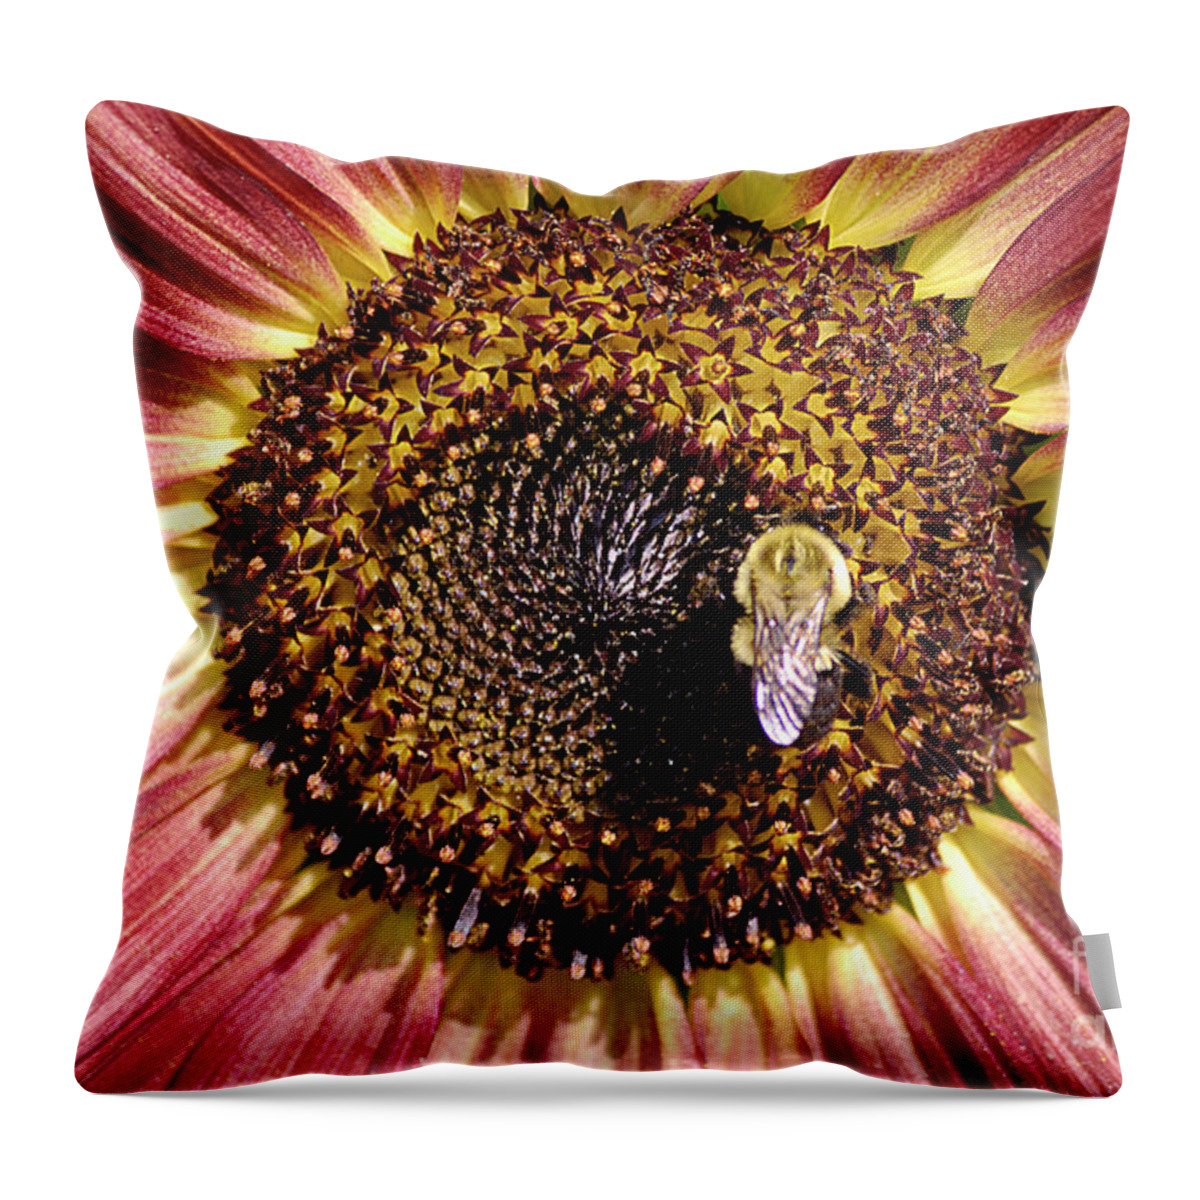 Garden Throw Pillow featuring the photograph Getting Some Sun by Randy Bodkins